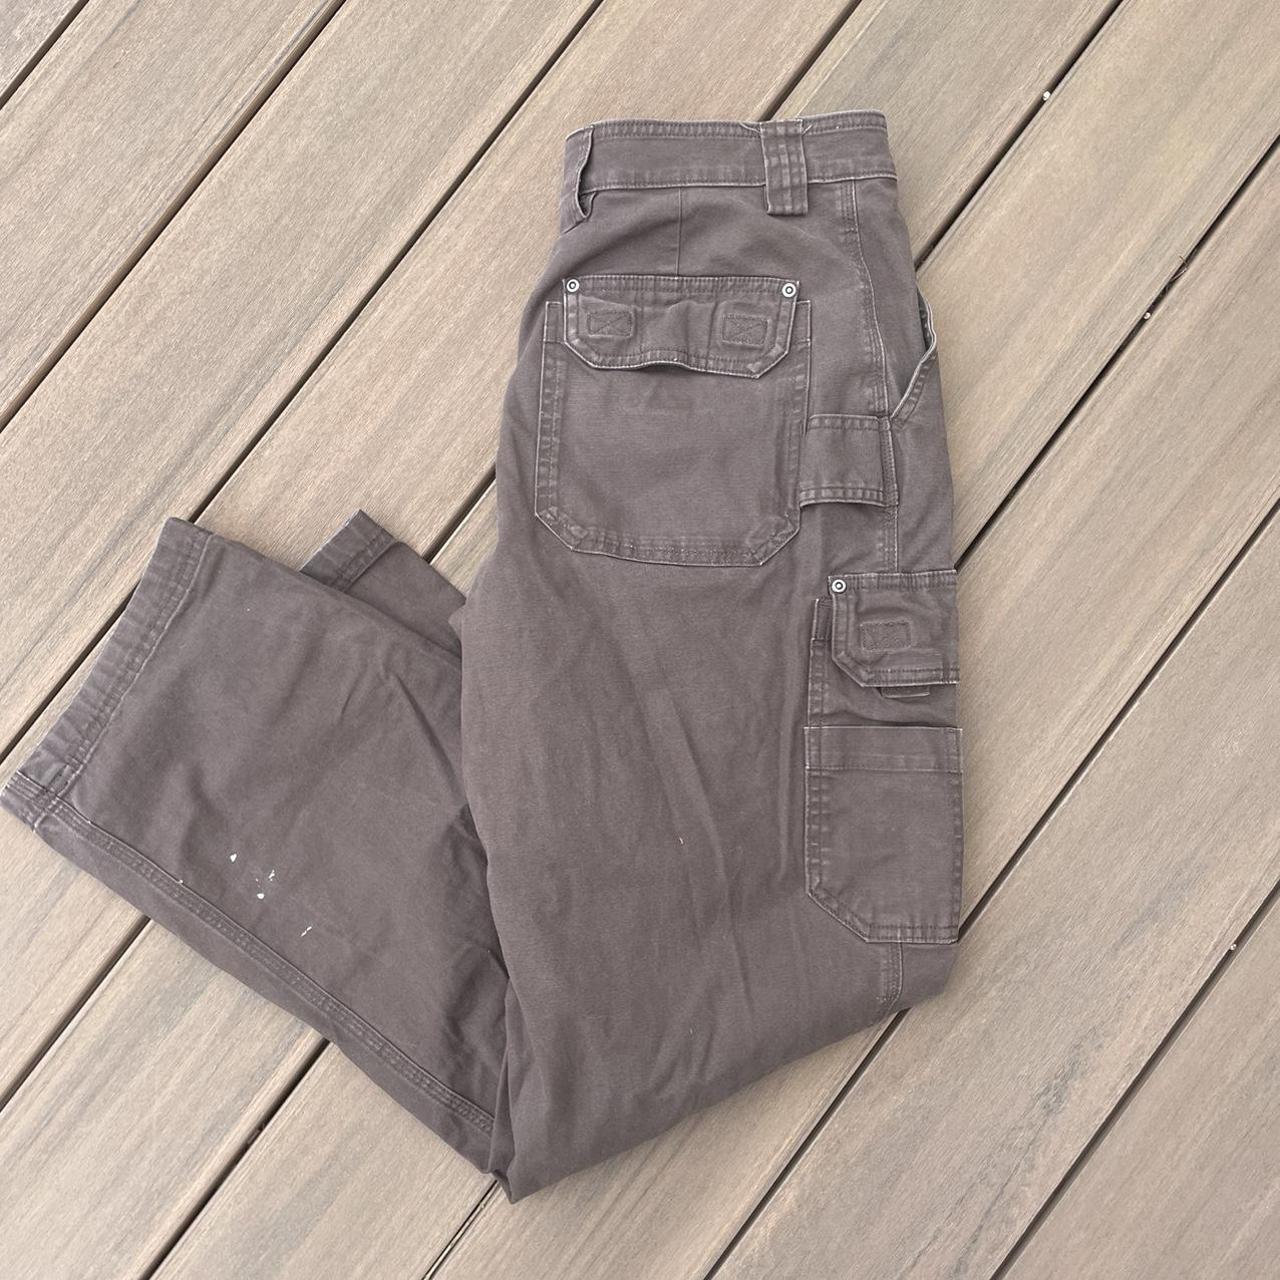 Duluth Trading Company Men's Brown Trousers